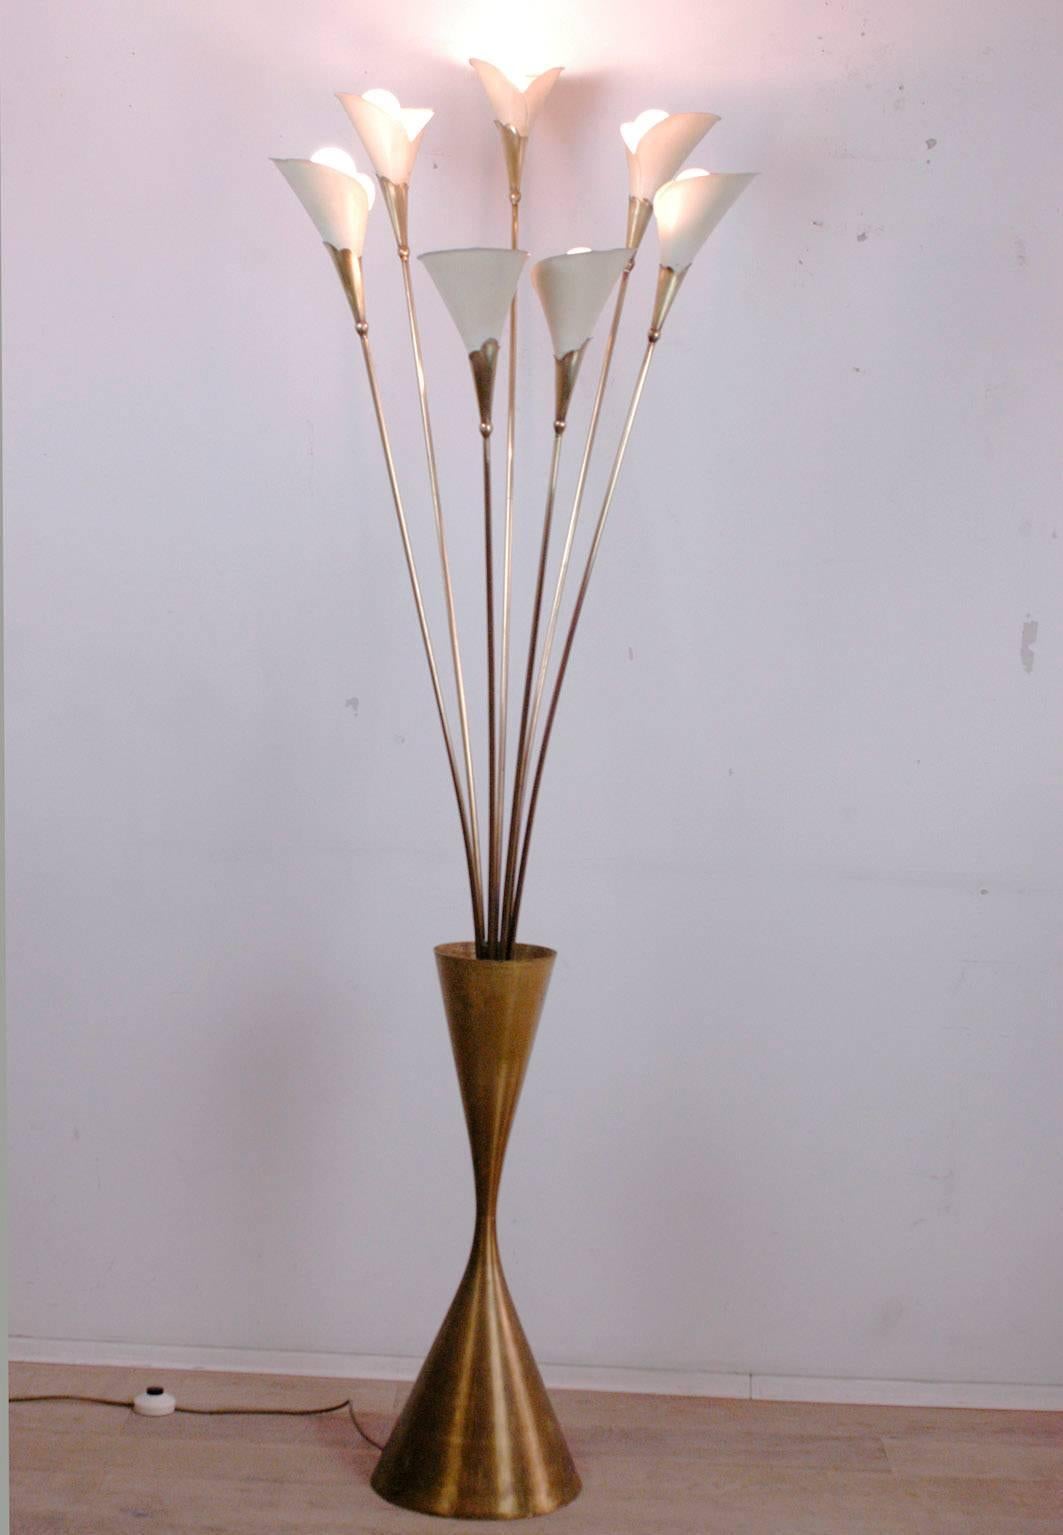 Seven stems with light sockets and shades shaped as the 